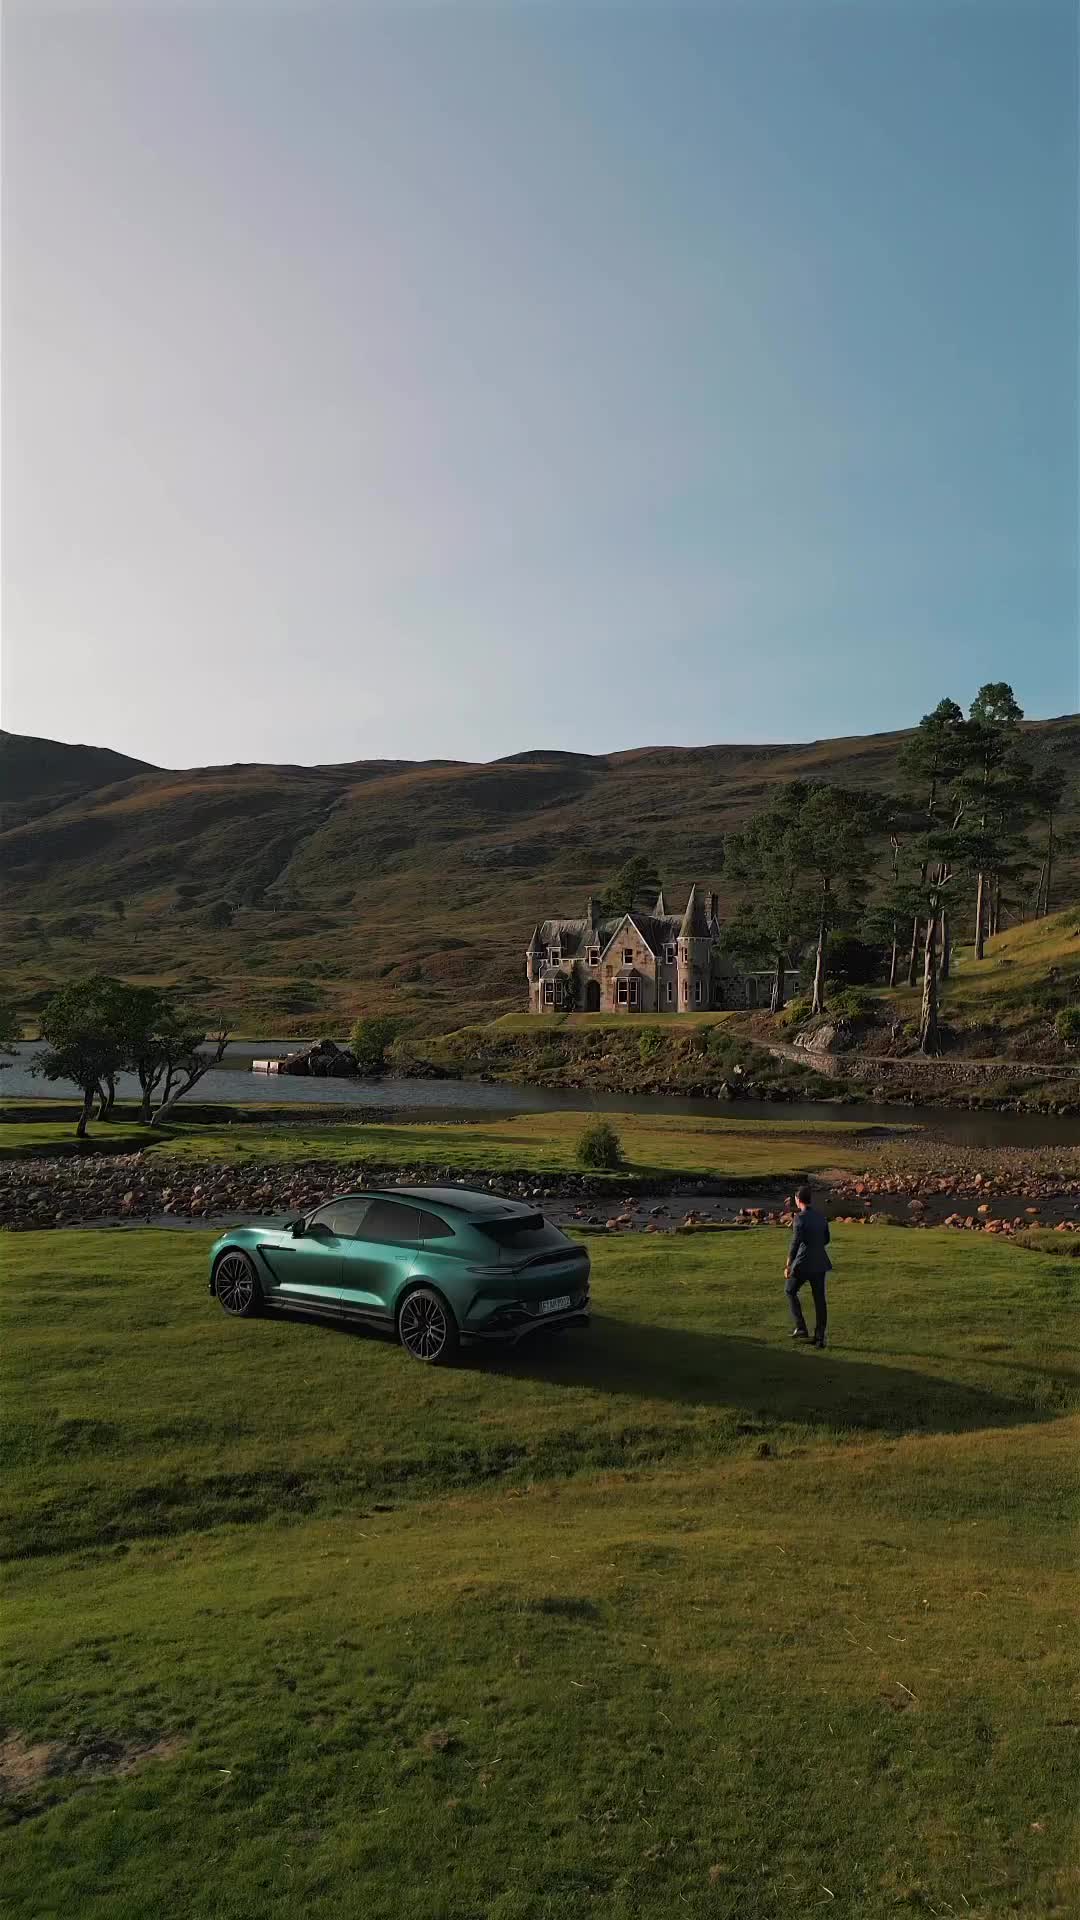 Straight out from a movie. The perfect scenery in the Scottish highlands with @astonmartin #DBX707 #GlenAffric 
• • • • •
🎥 ©️ Prod. #TomClaeren

#AstonMartin #DBX #Scotland #Travel #Destination #Photography #BillieEilish